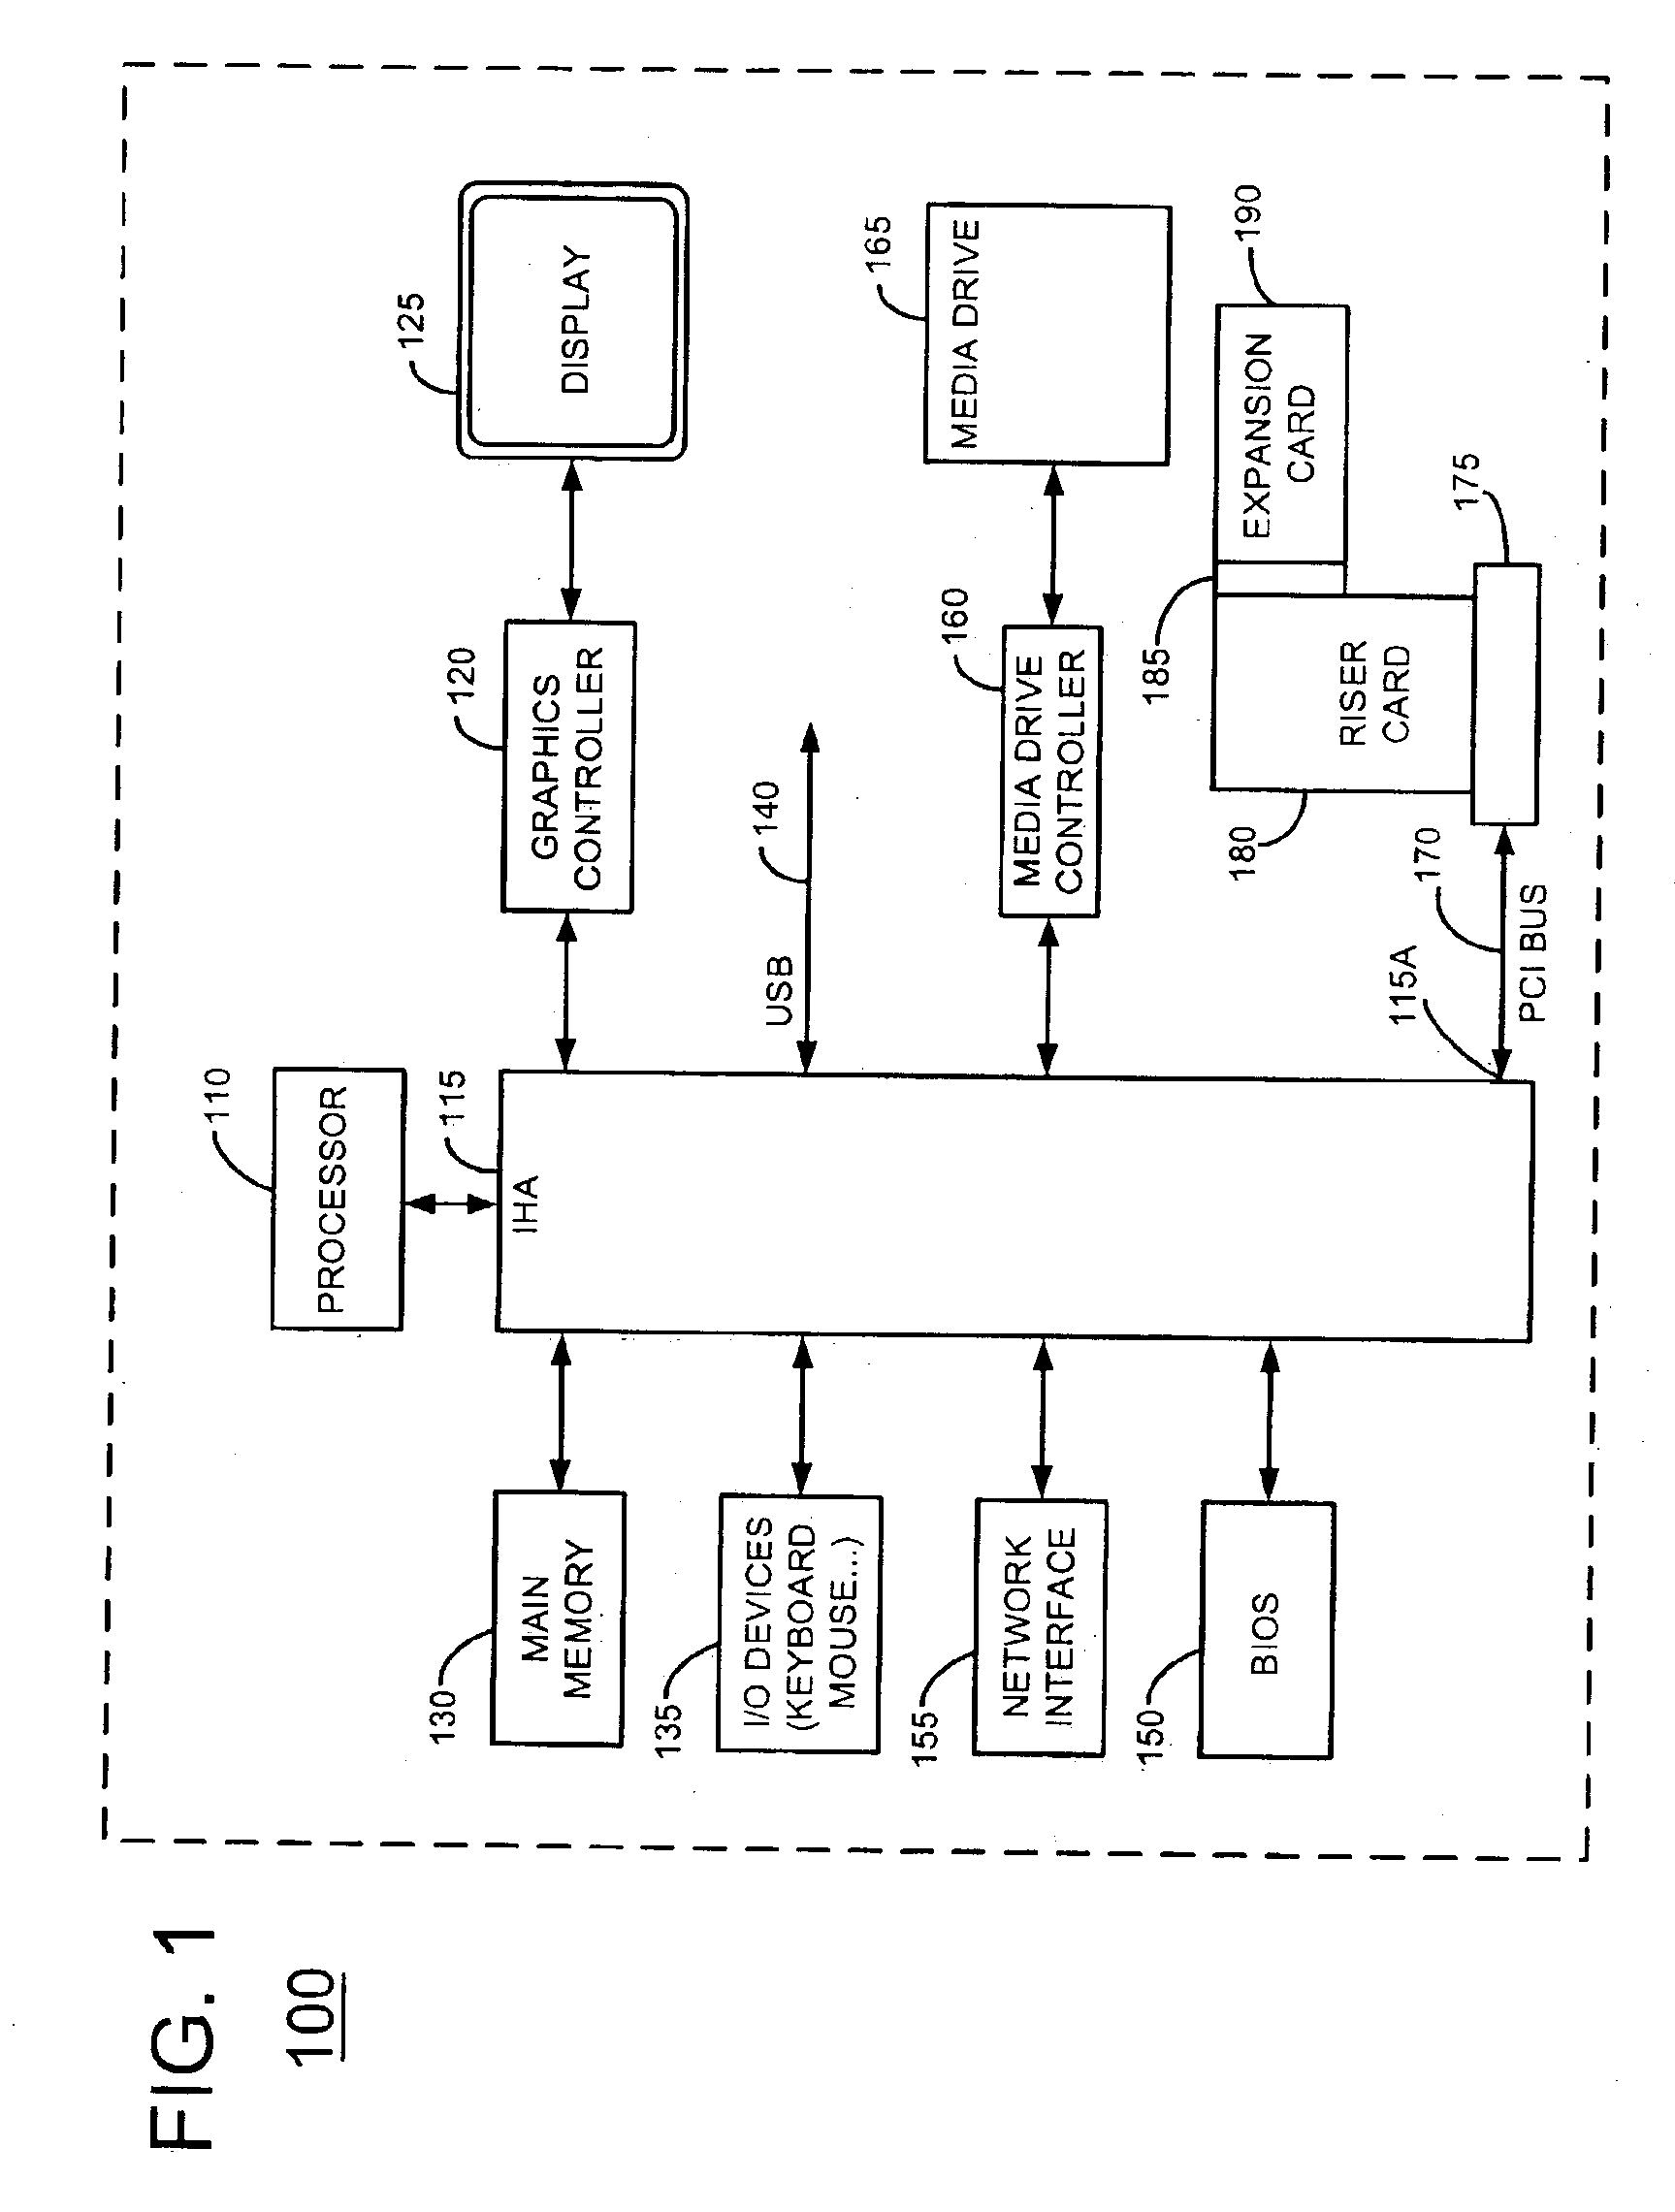 Information handling system including a bus in which impedance discontinuities associated with multiple expansion connectors are reduced